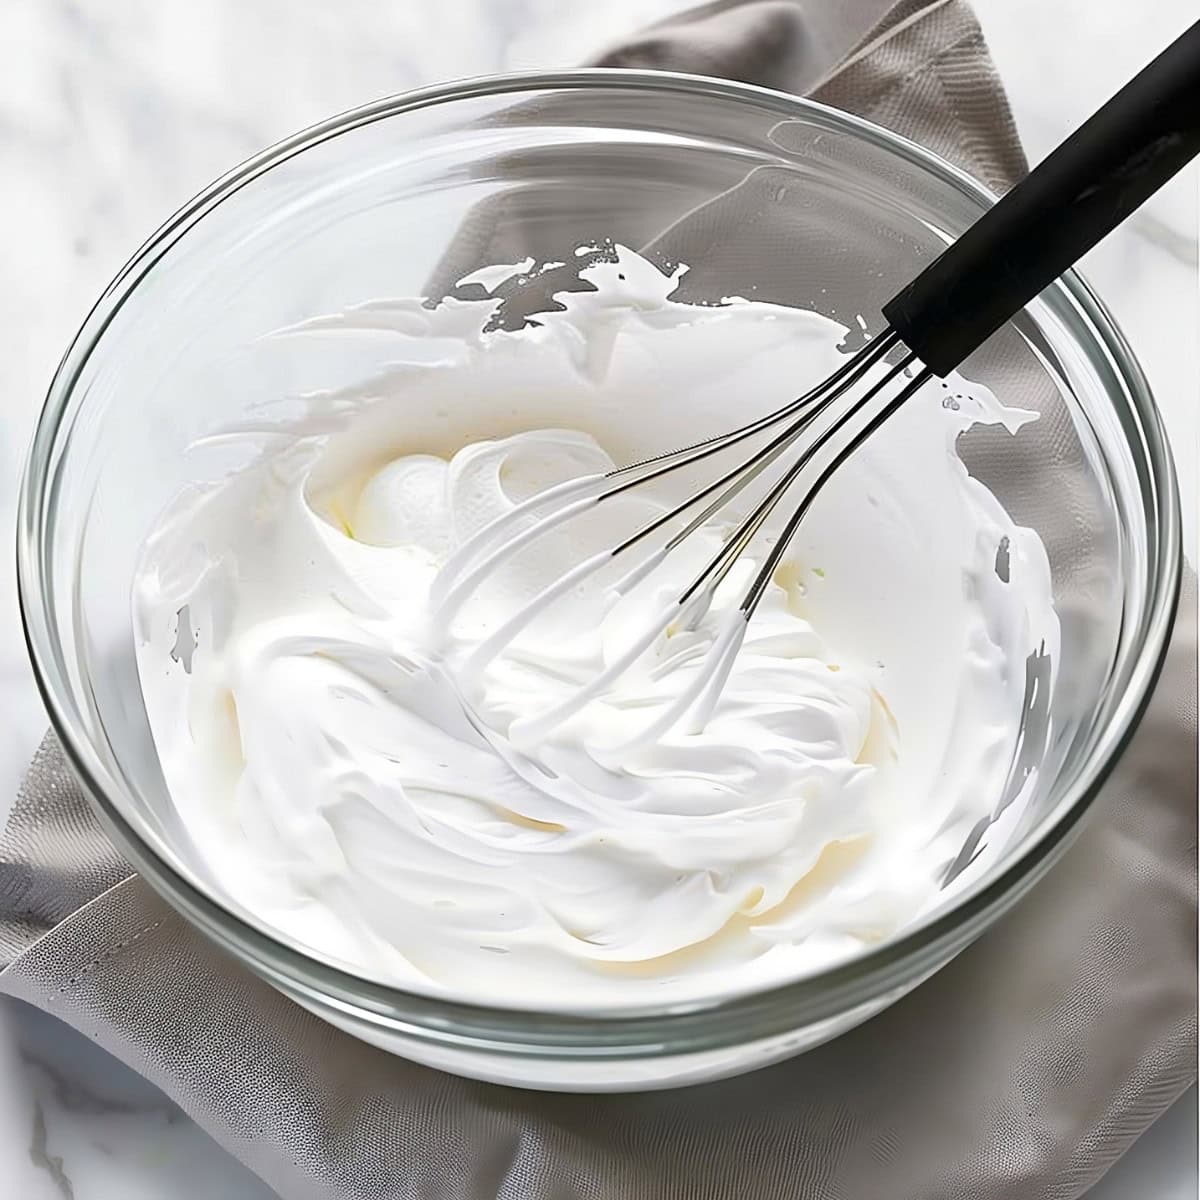 A glass bowl of marshmallow fluff with a whisk